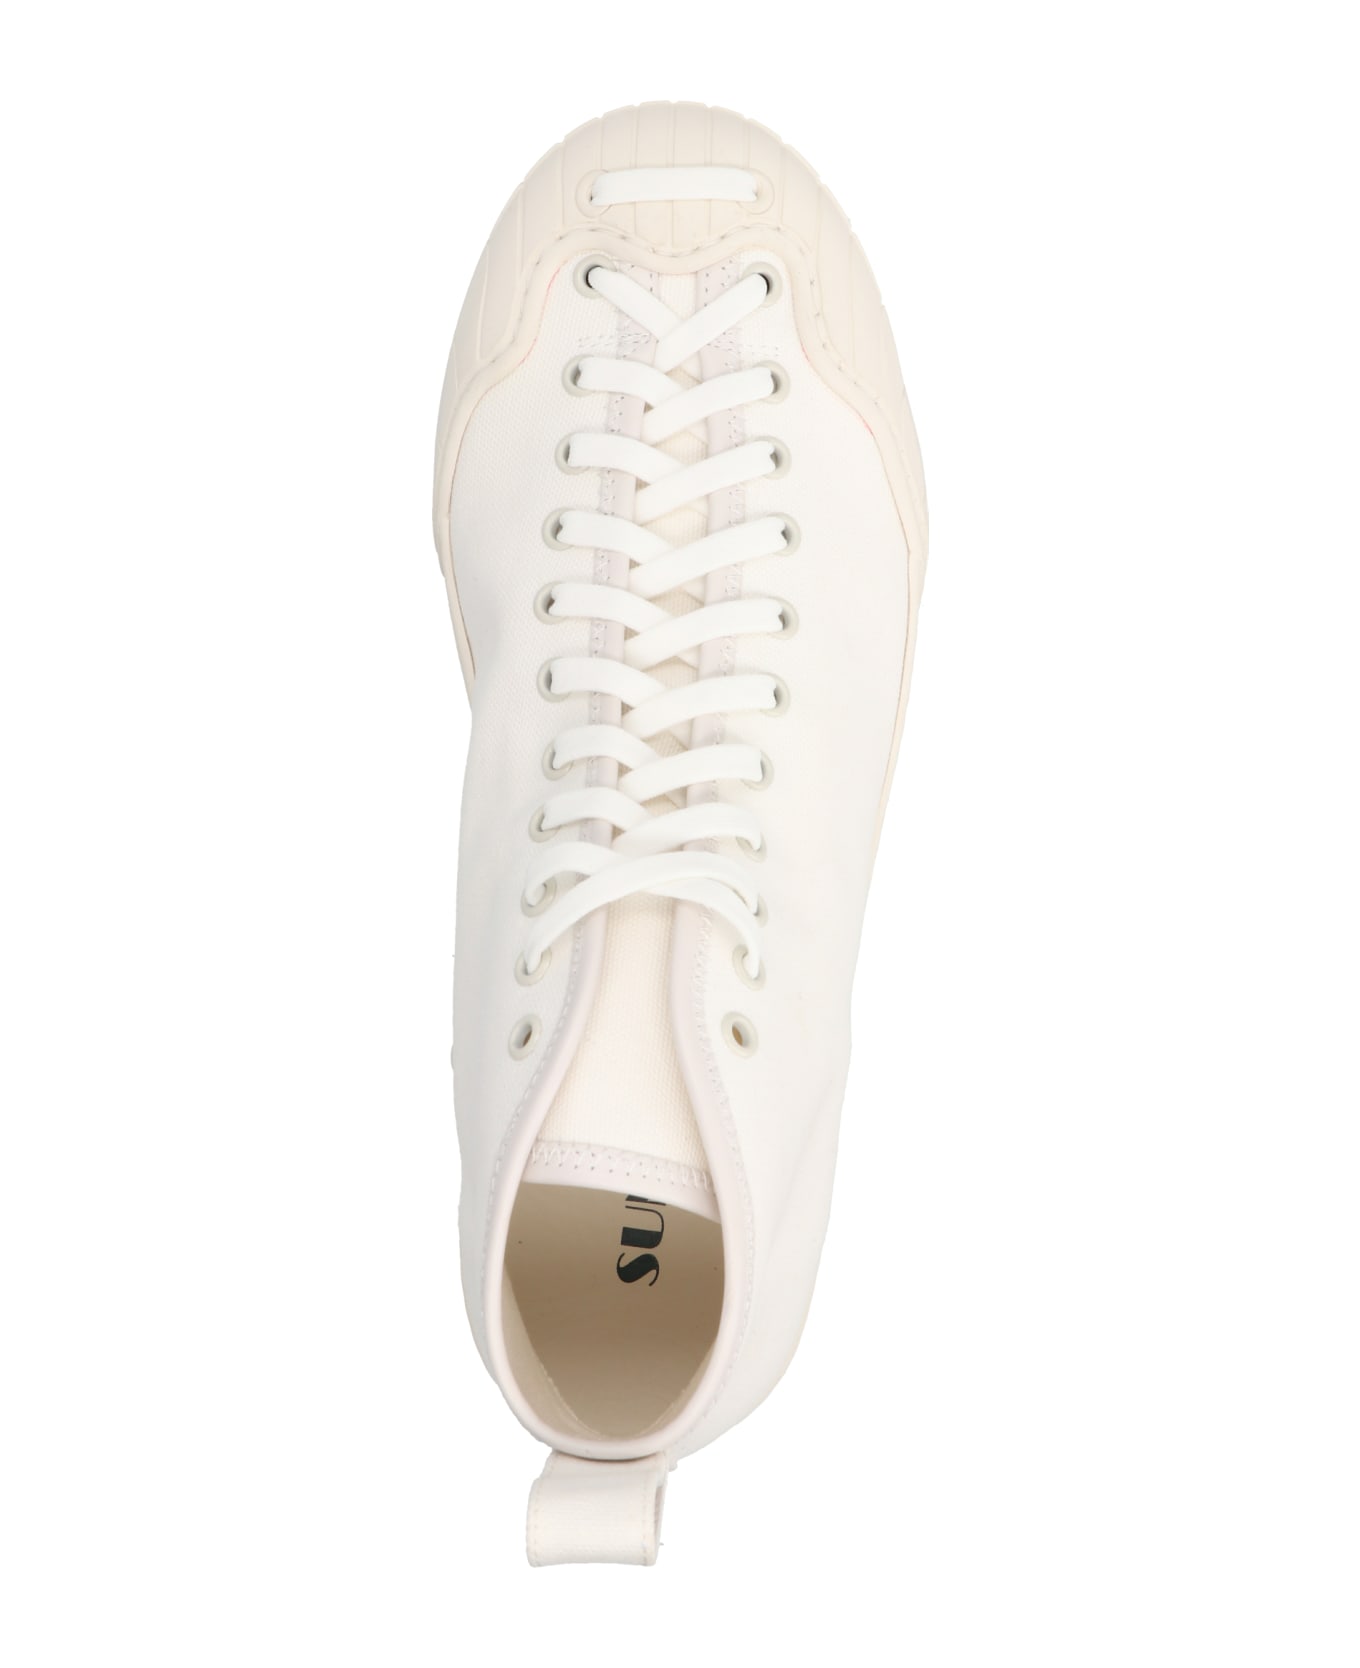 Sunnei 'easy Shoes' Sneakers - White